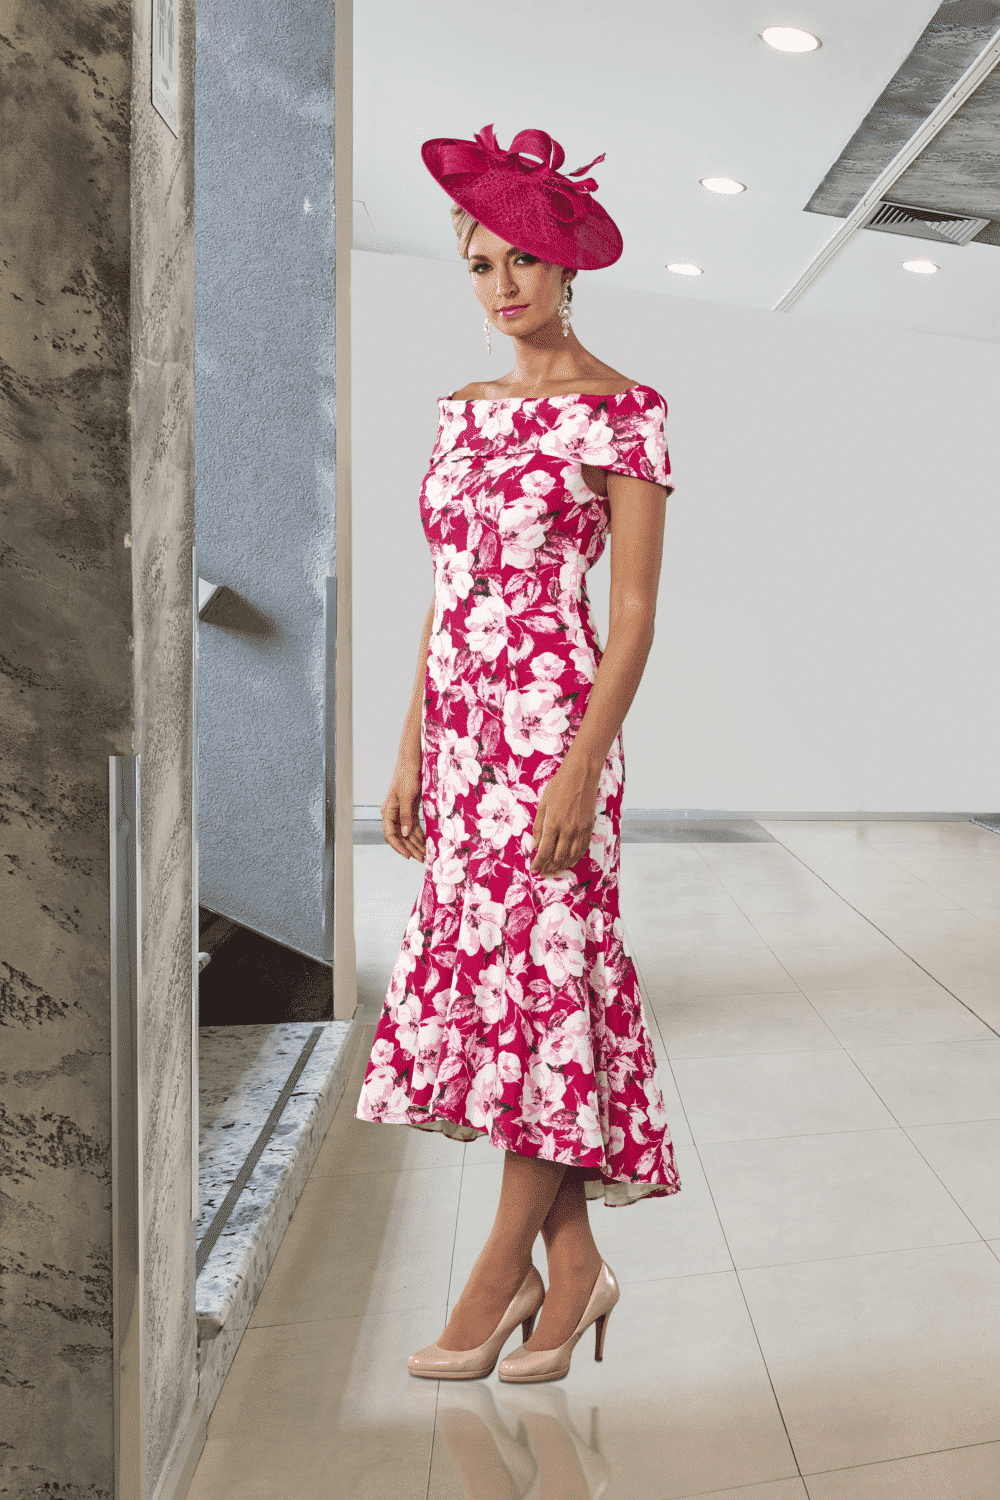 Manor Fashions - Mother of the bride \u0026 special occasion outfits - Cornwall